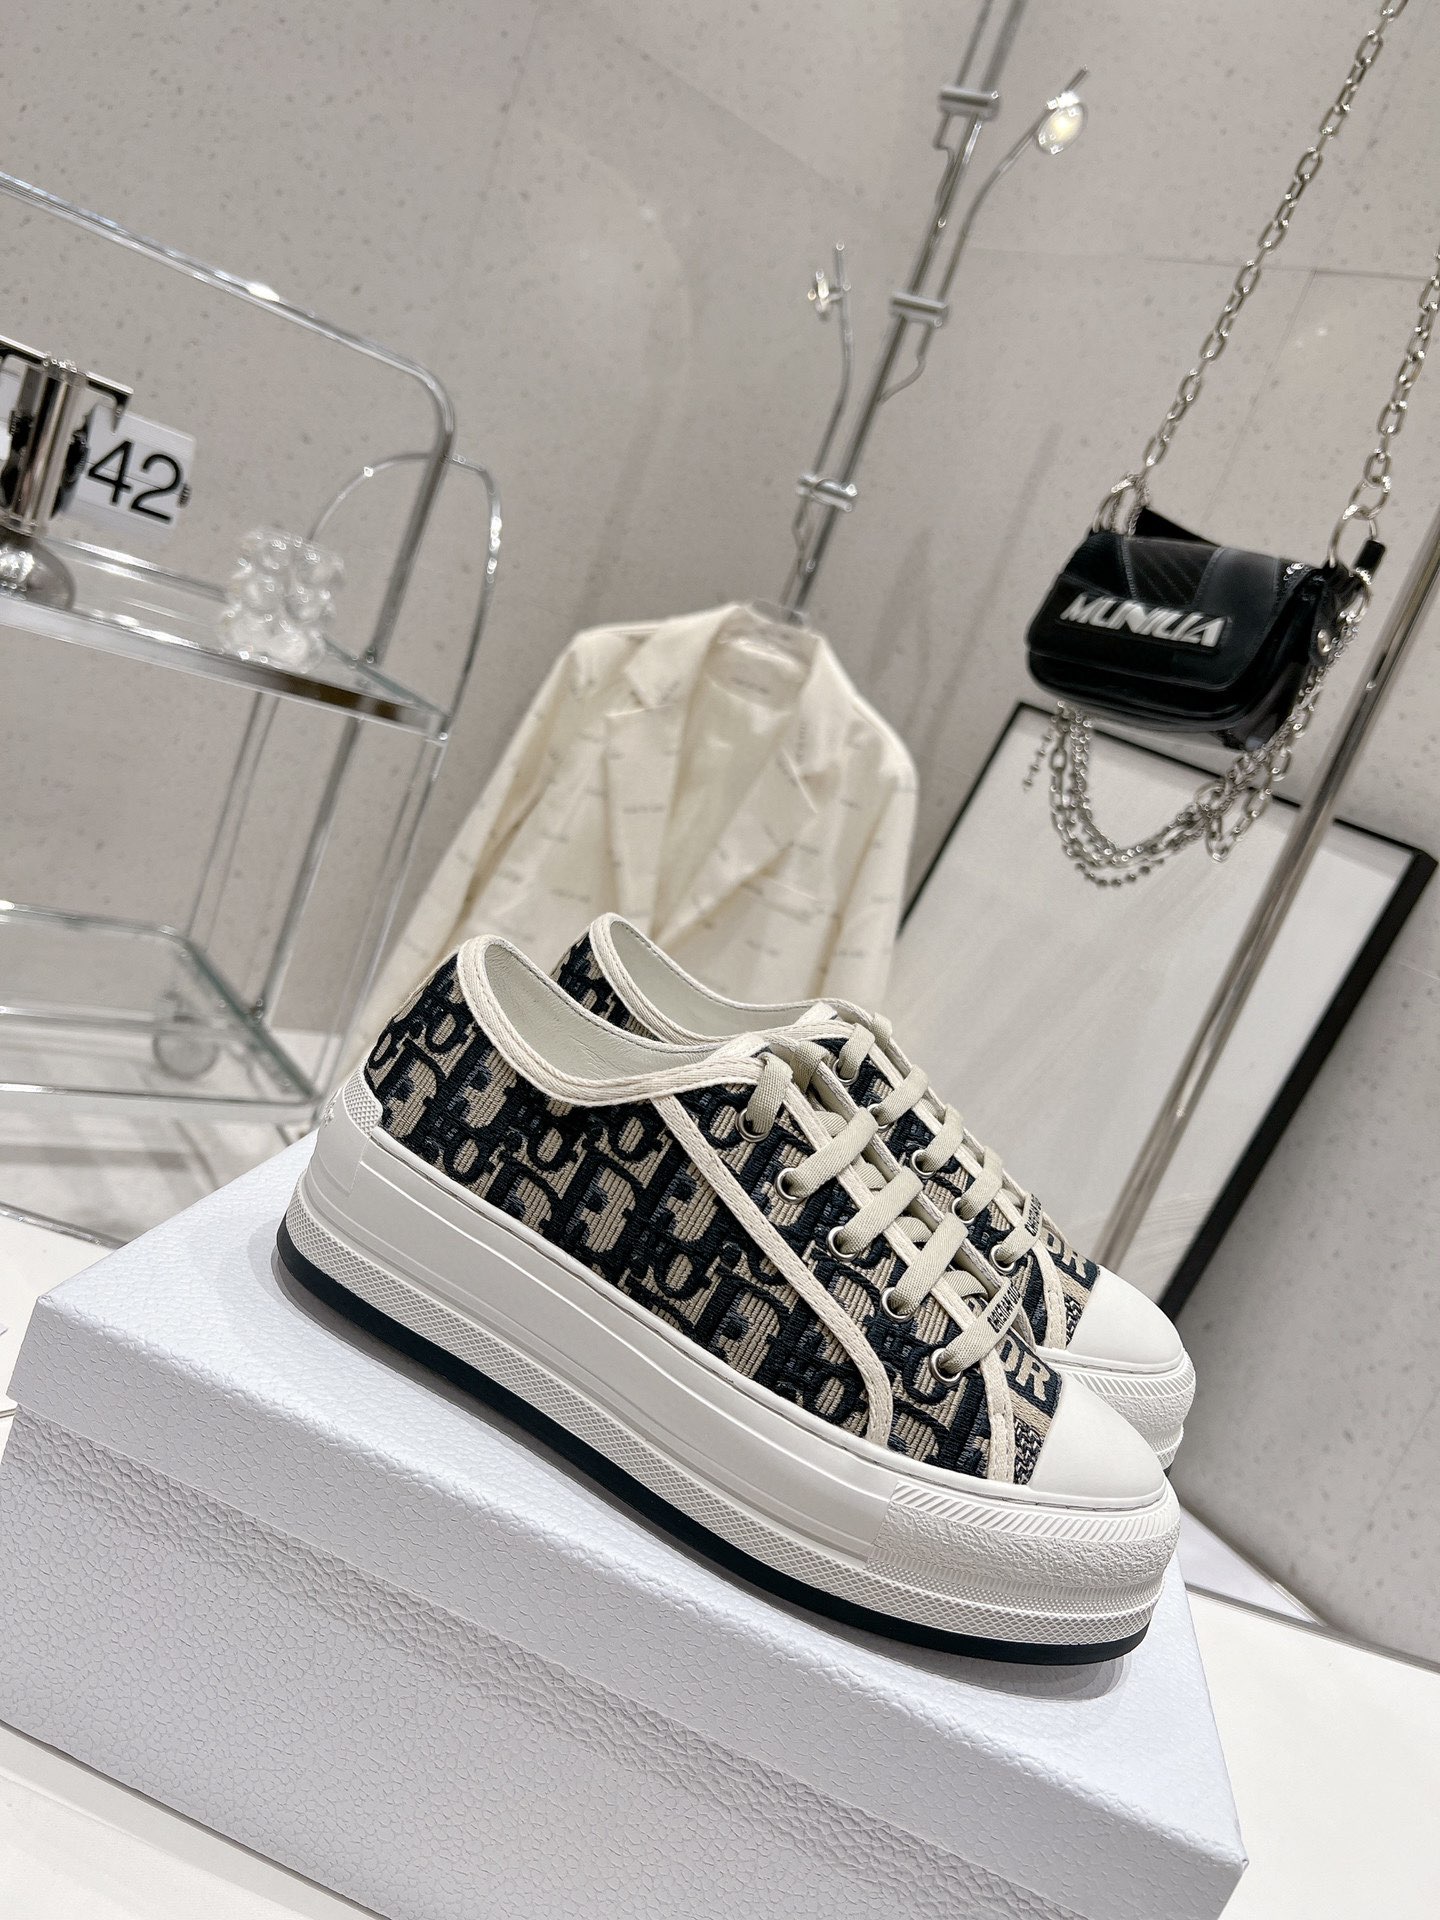 Dior Sneakers Canvas Shoes Embroidery Women Canvas Cotton PU Sheepskin Oblique Casual